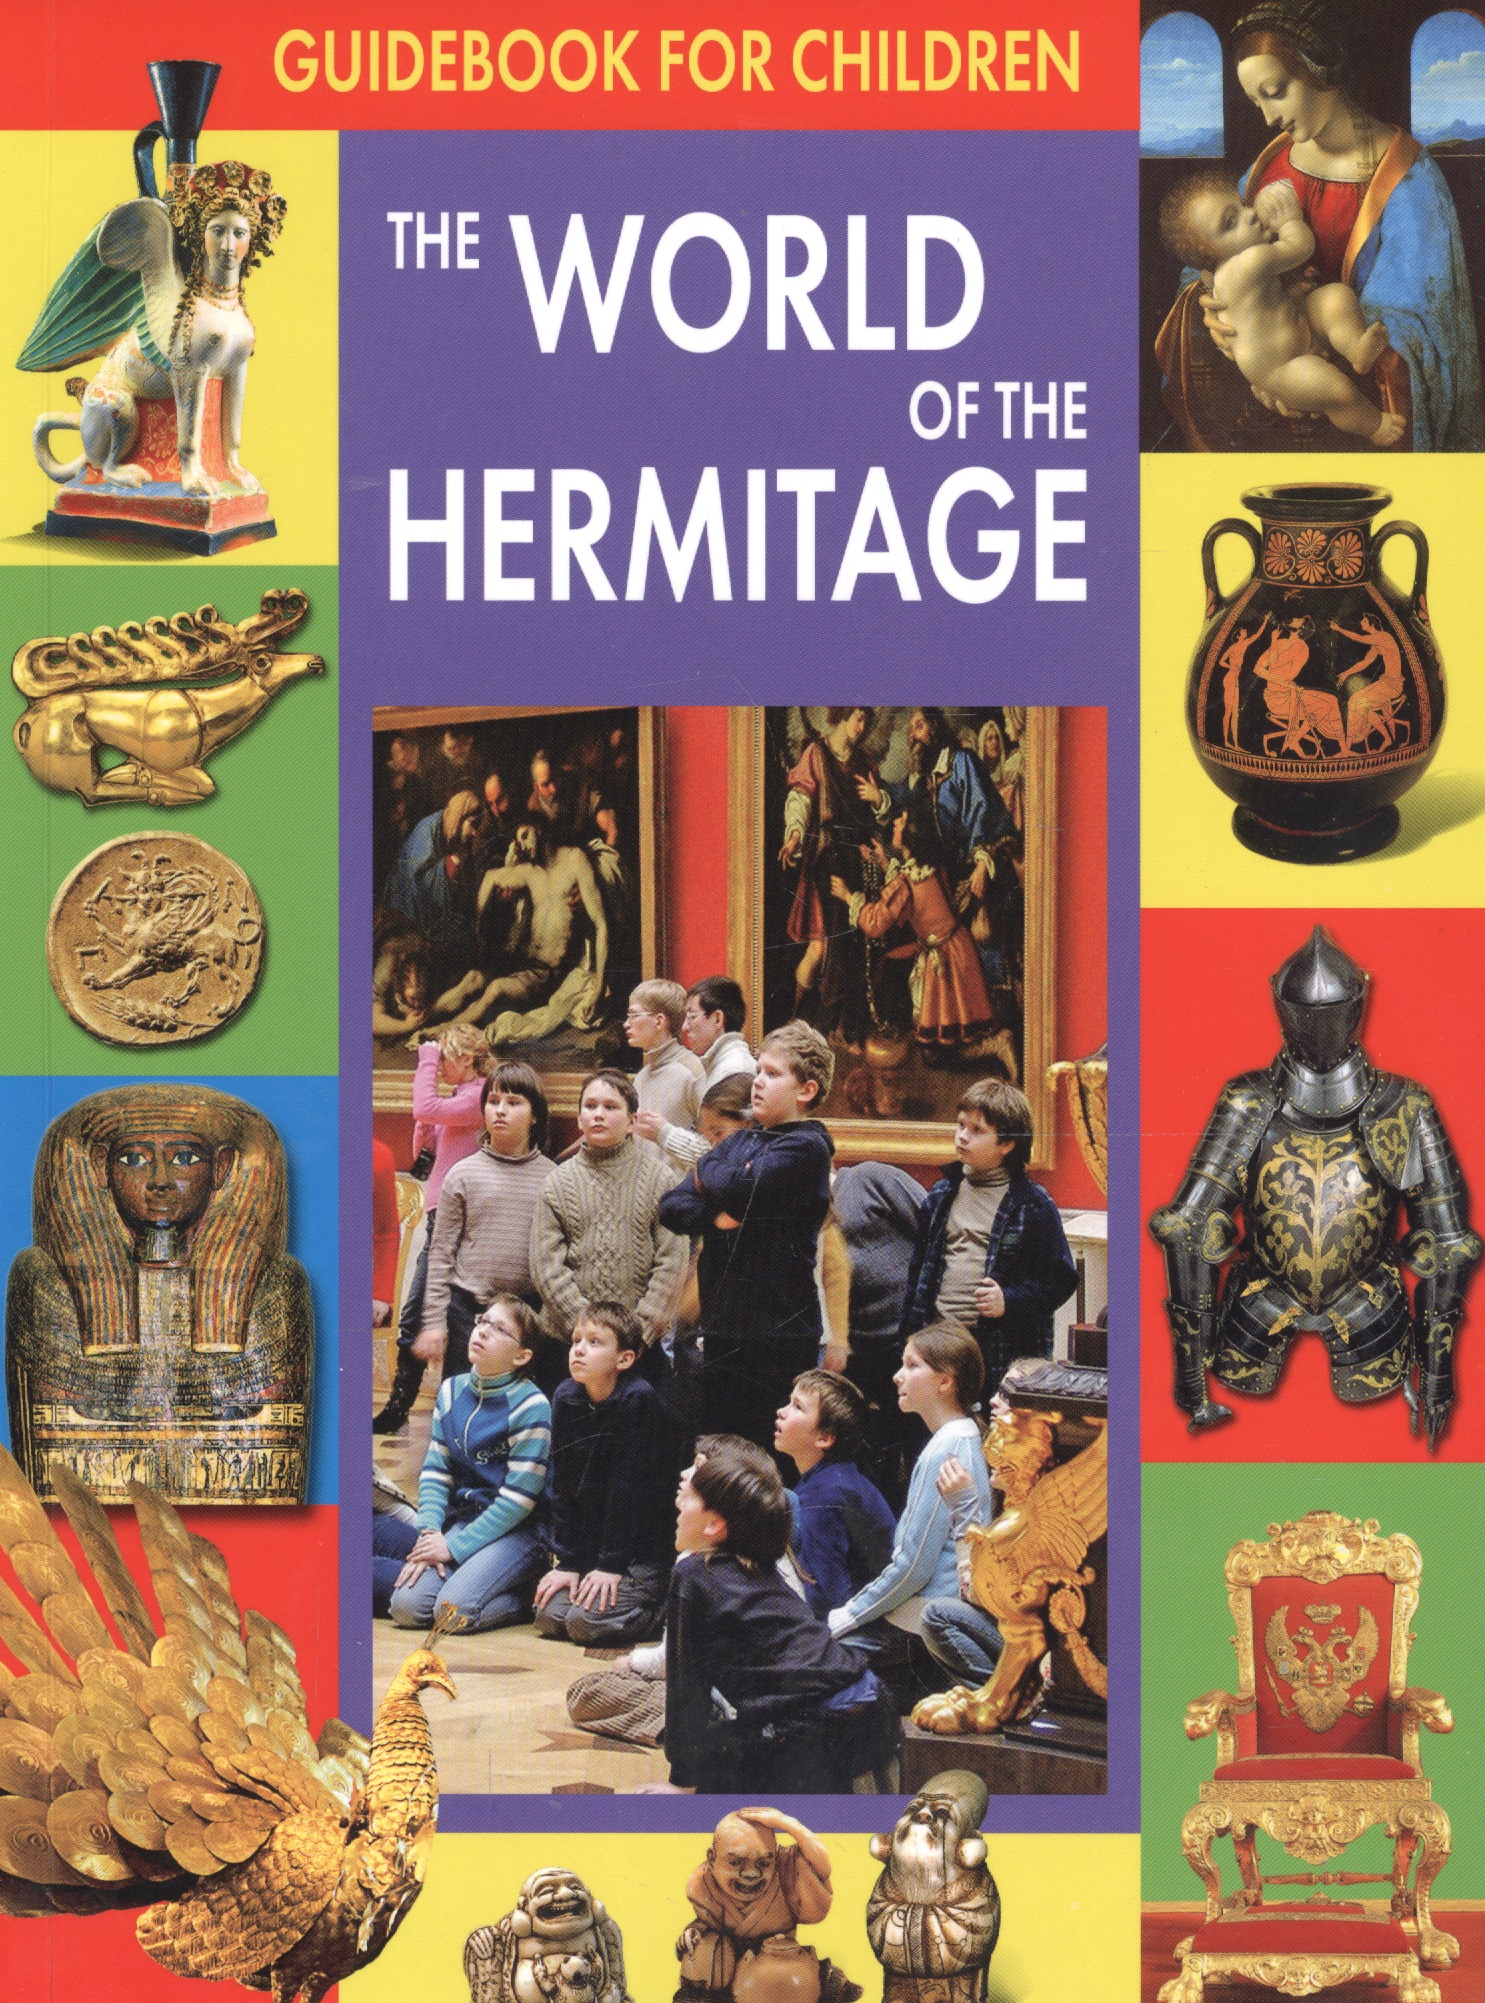 Guidebook For Children. The World of the Hermitage